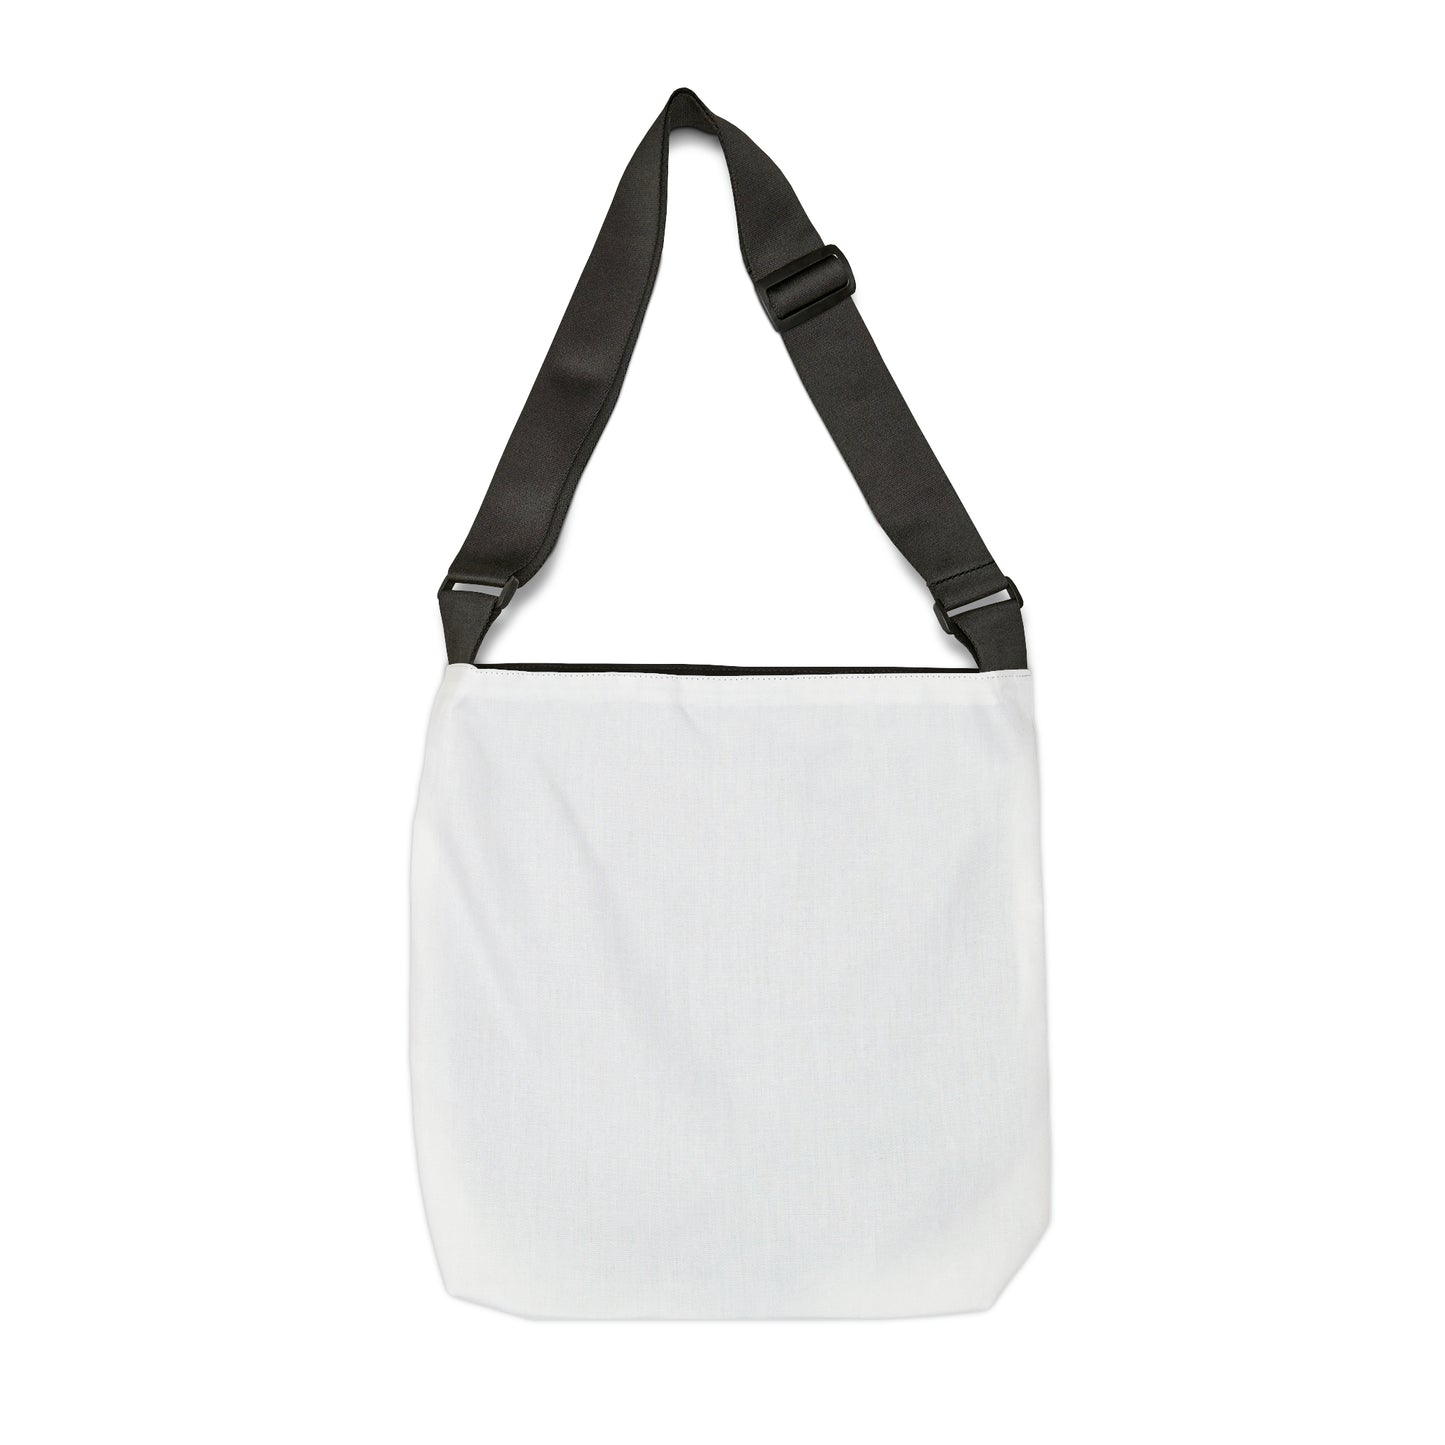 White Colorful Cannabis Chic Tote: For the Stylish Green Thumb